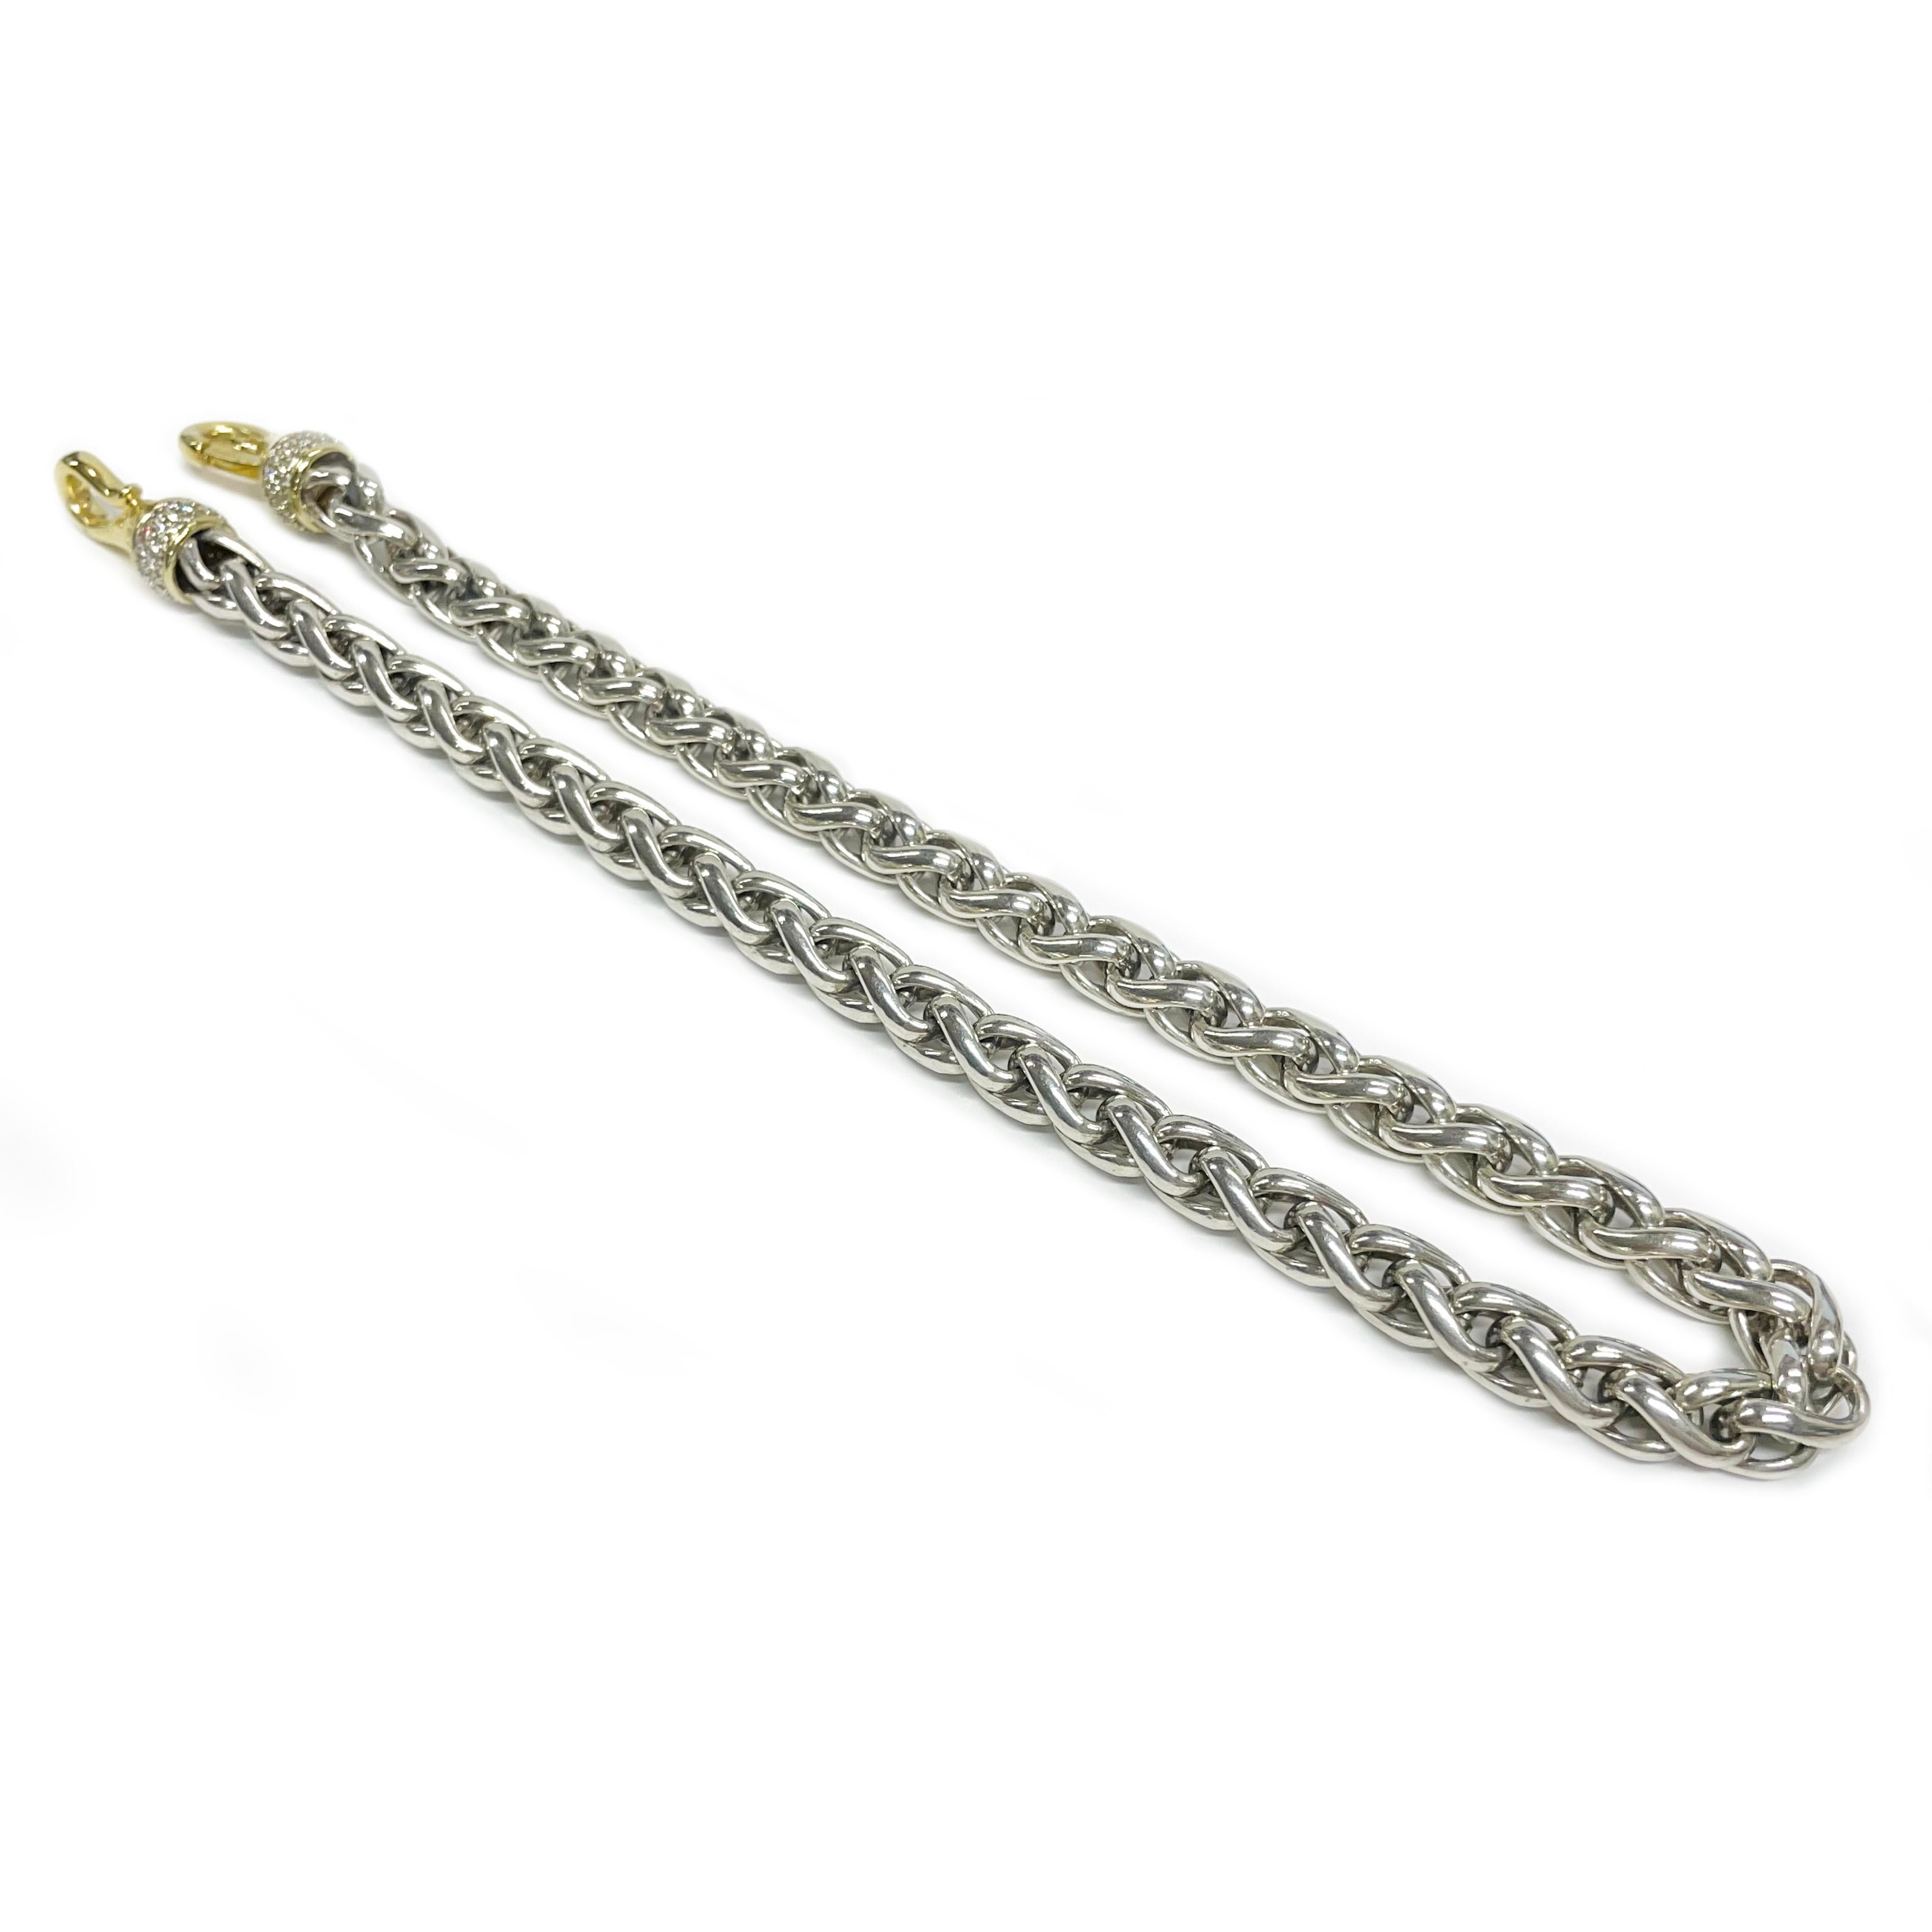 David Yurman 18 Karat Yellow Gold Sterling Diamond Necklace. The two-tone link chain necklace features an 18 karat yellow gold smooth clasps with pave diamond details and the classic Yurman cable design in sterling silver. The diamonds are 1.3mm for